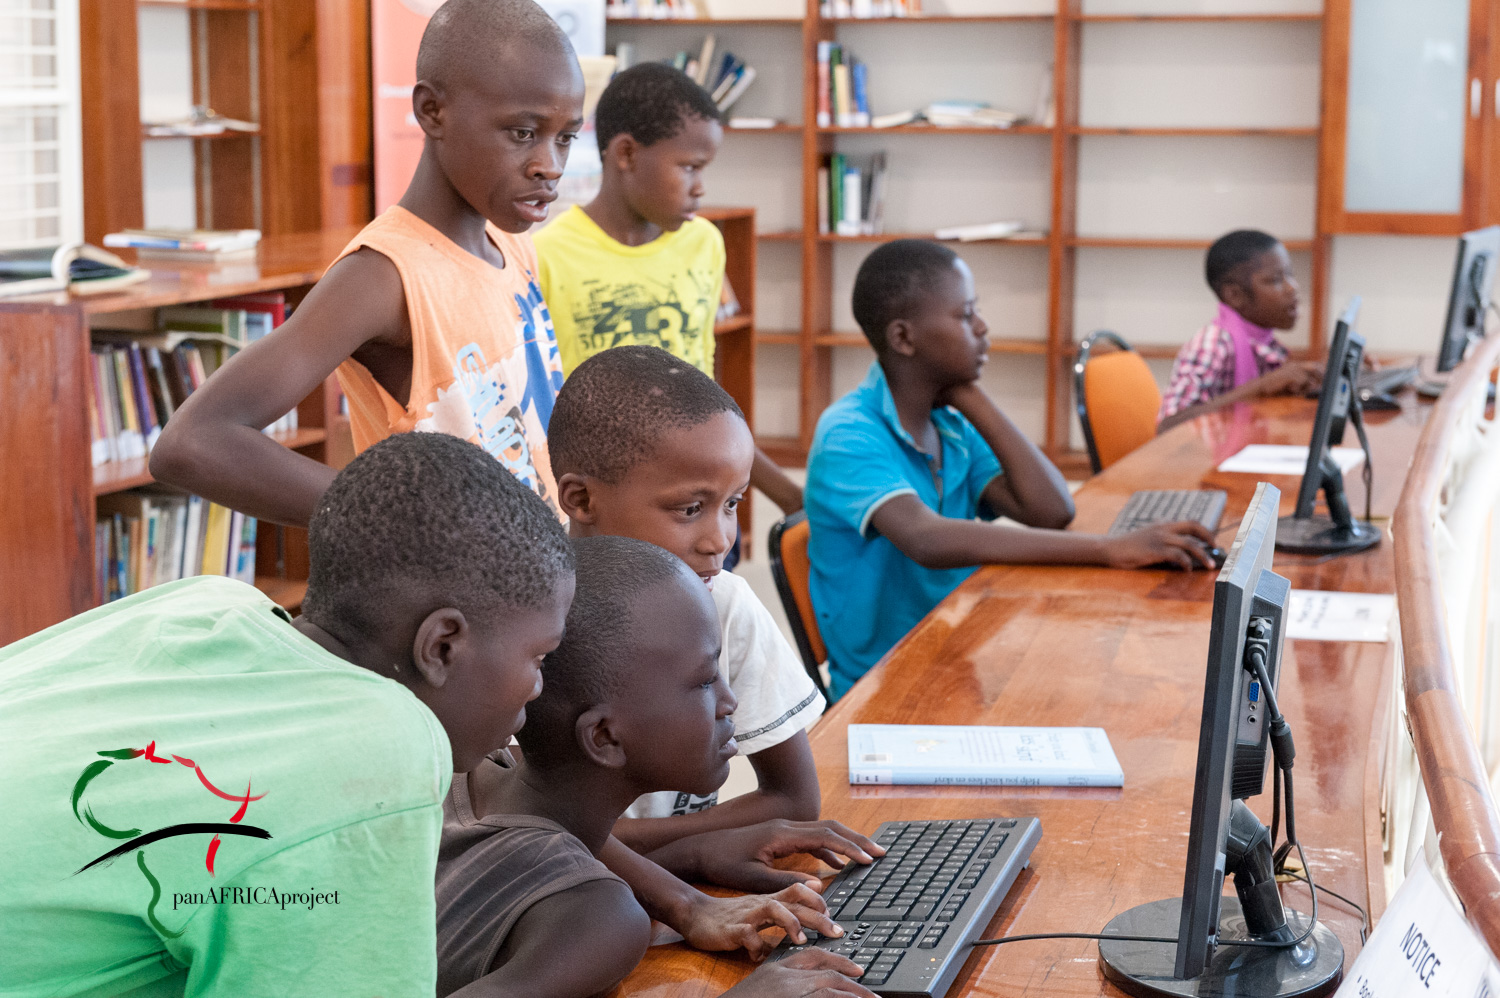 Children working on computers in the library